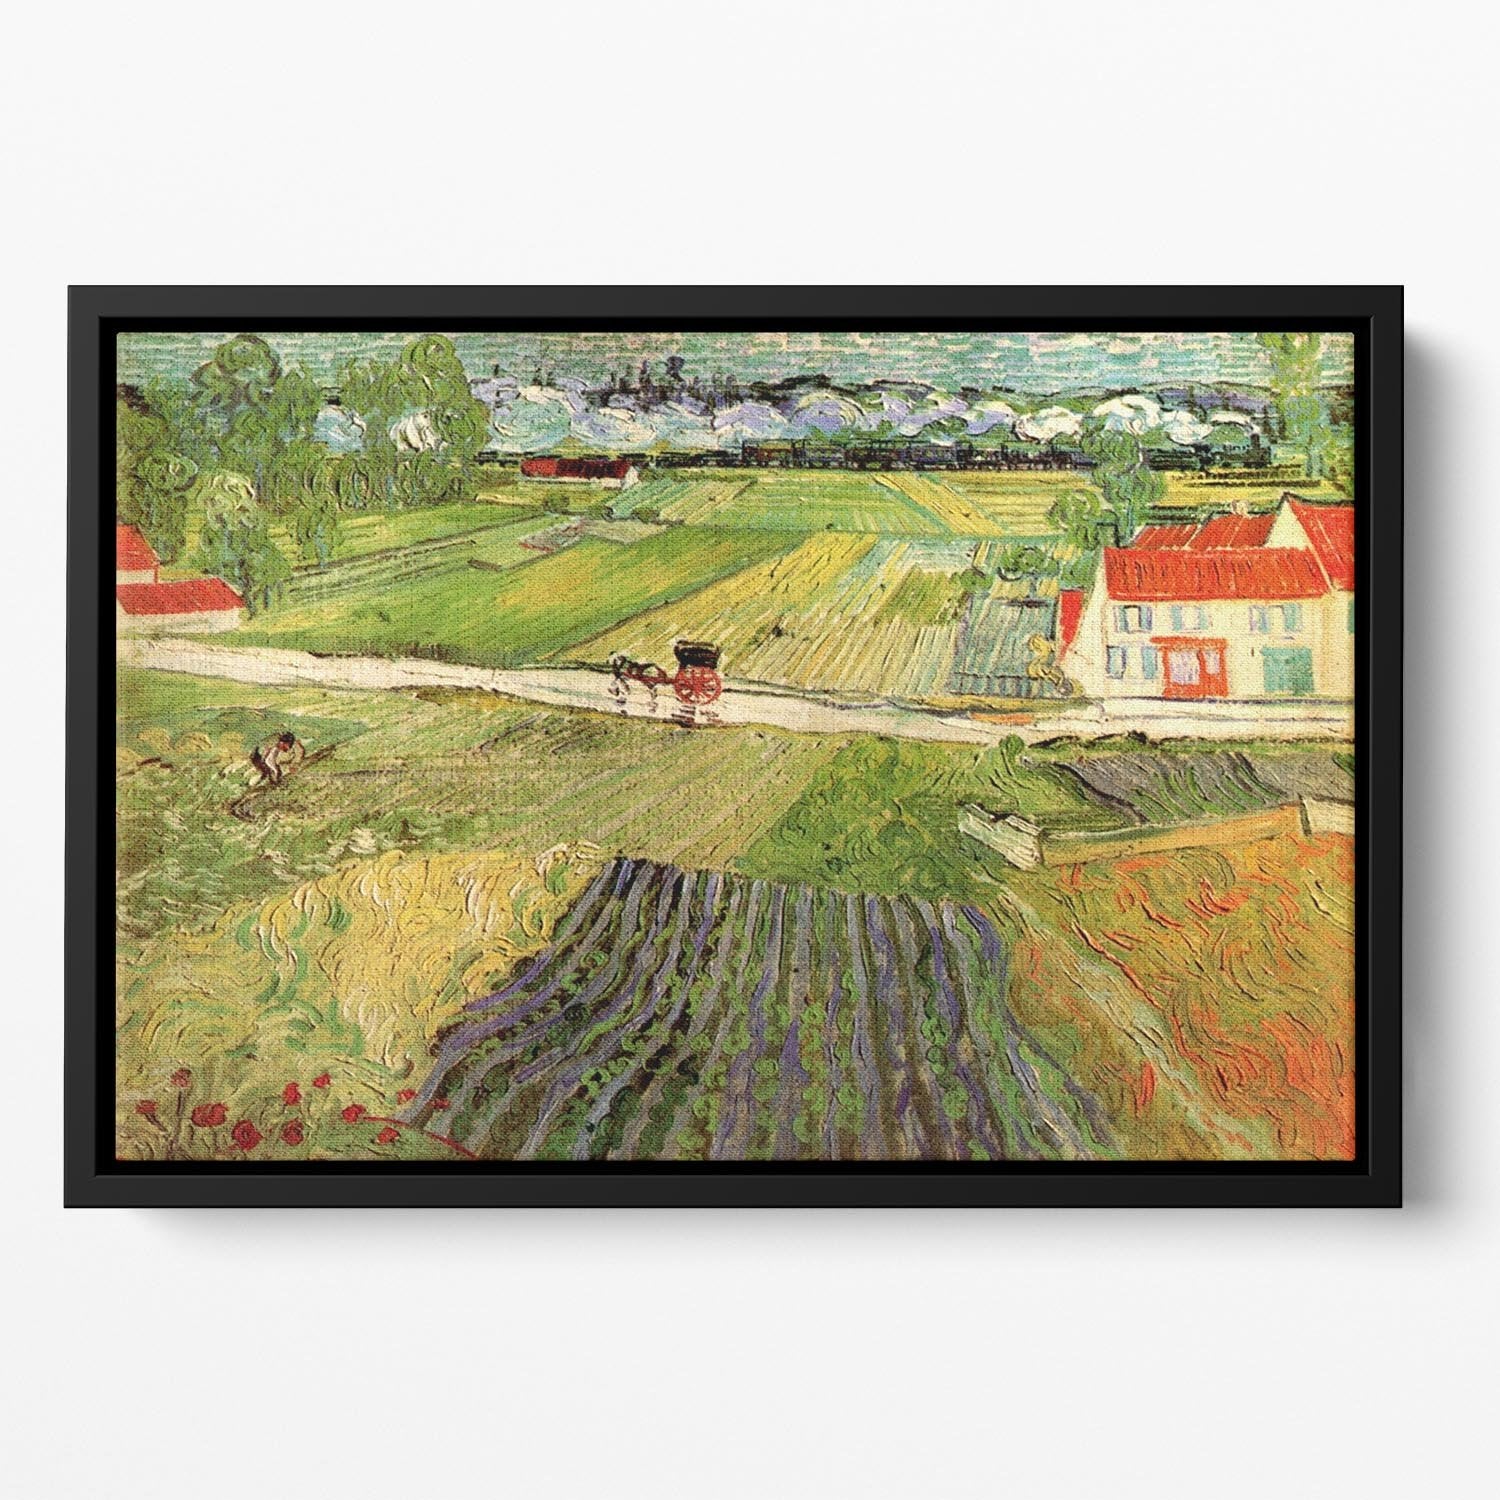 Landscape with Carriage and Train in the Background by Van Gogh Floating Framed Canvas